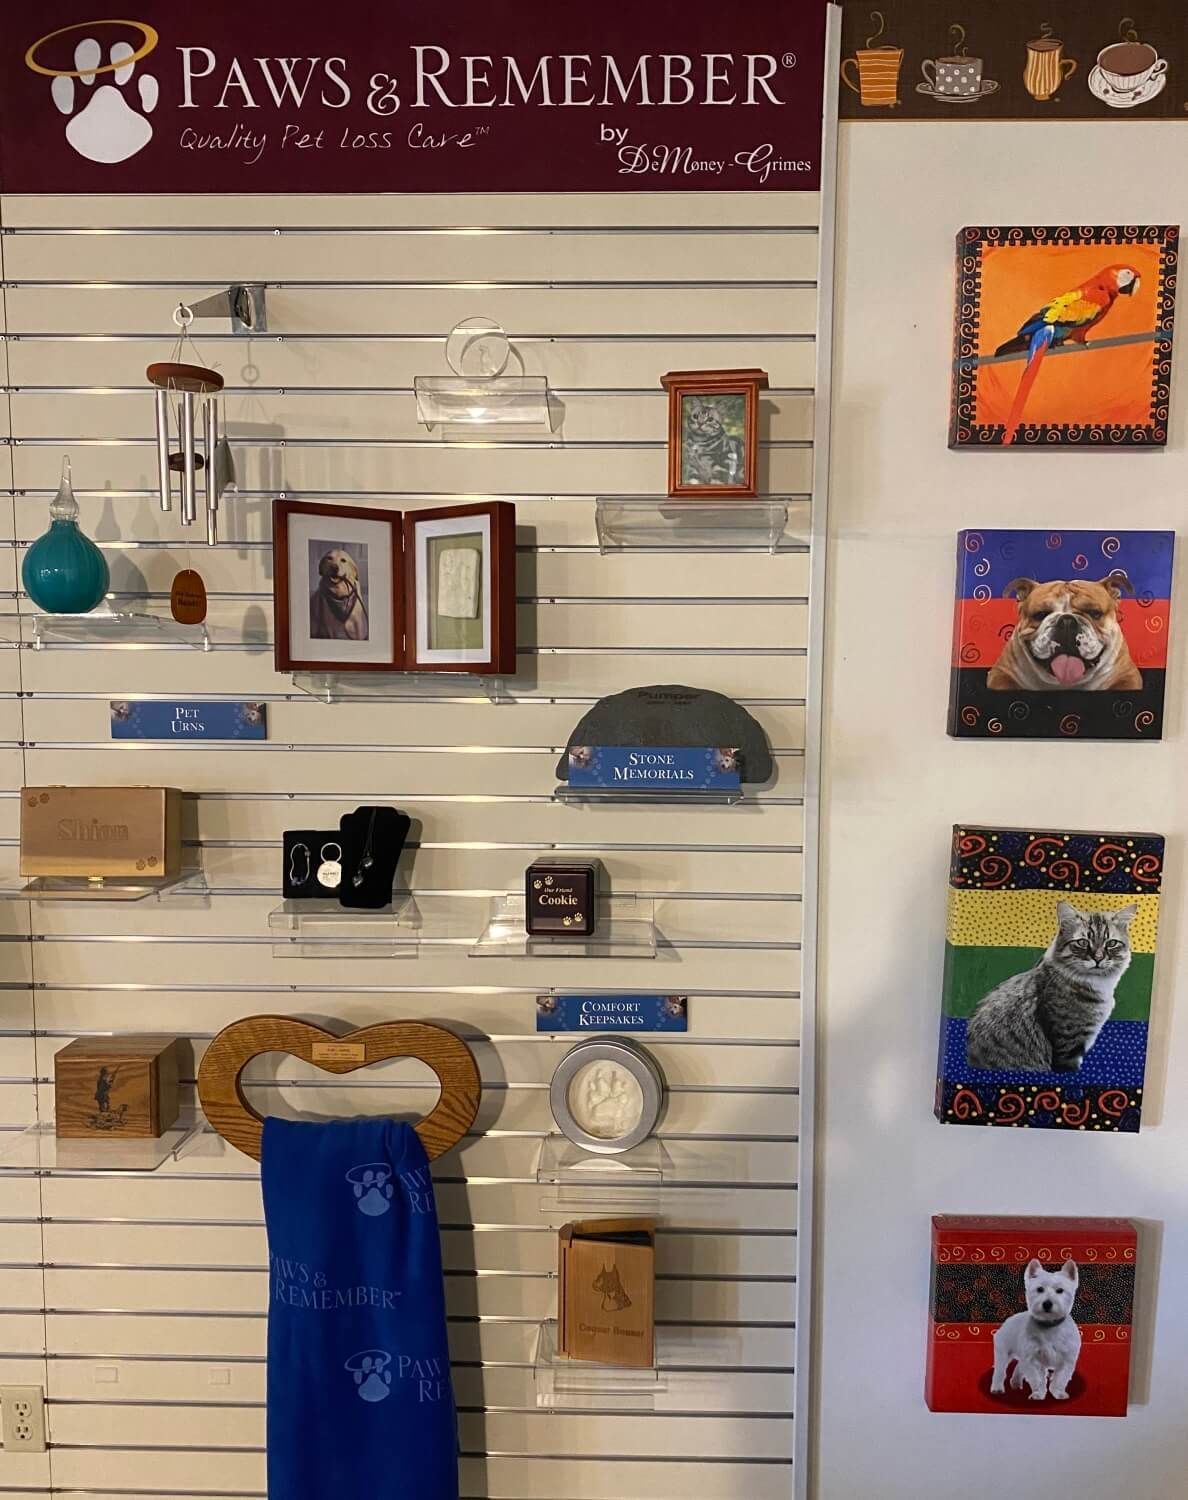 Display of pet cremation merchandise at DeMoney-Grimes Funeral Home